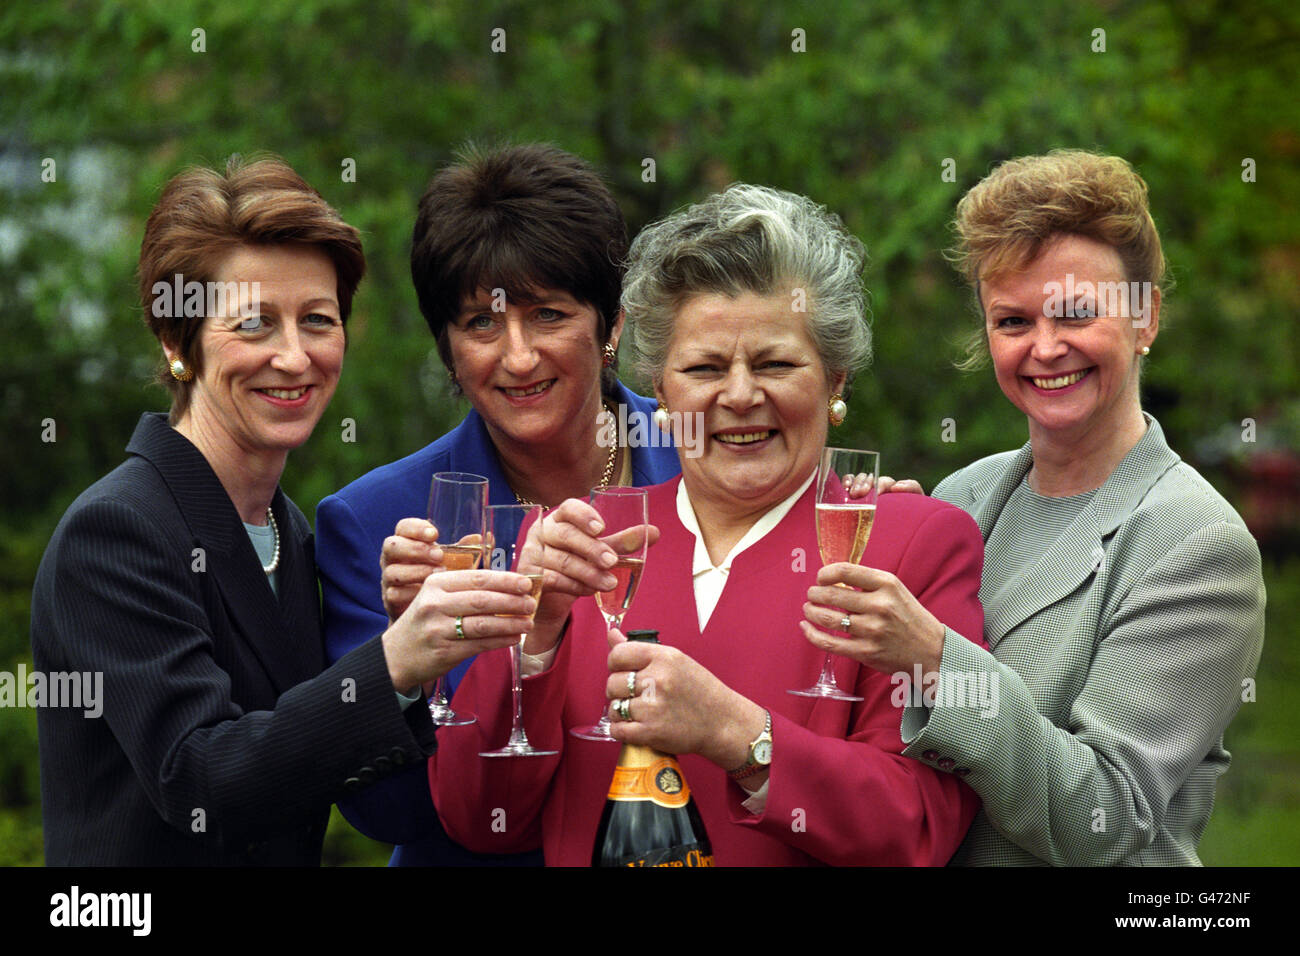 The shortlist for the 1996 Veuve Clicquot Award, Business Woman of the Year were announced at Mosimann's Belfry in London. The finalists included (from left to right) Bridget Blow, Managing Director of ITnet, Andrea Wonfor, Joint Managing Director of Granada Productions, Virginia Lopalco, Co-Founder and Product Development Director of Pasta Reale, Sue Lyons, Deputy Managing Director & Director of Customer Operations, Rolls-Royce Military Aero Engines Ltd. Nicola Foulston, Chief Executive of Brands Hatch Leisure plc, has also been shortlisted but was unable to attend. Stock Photo